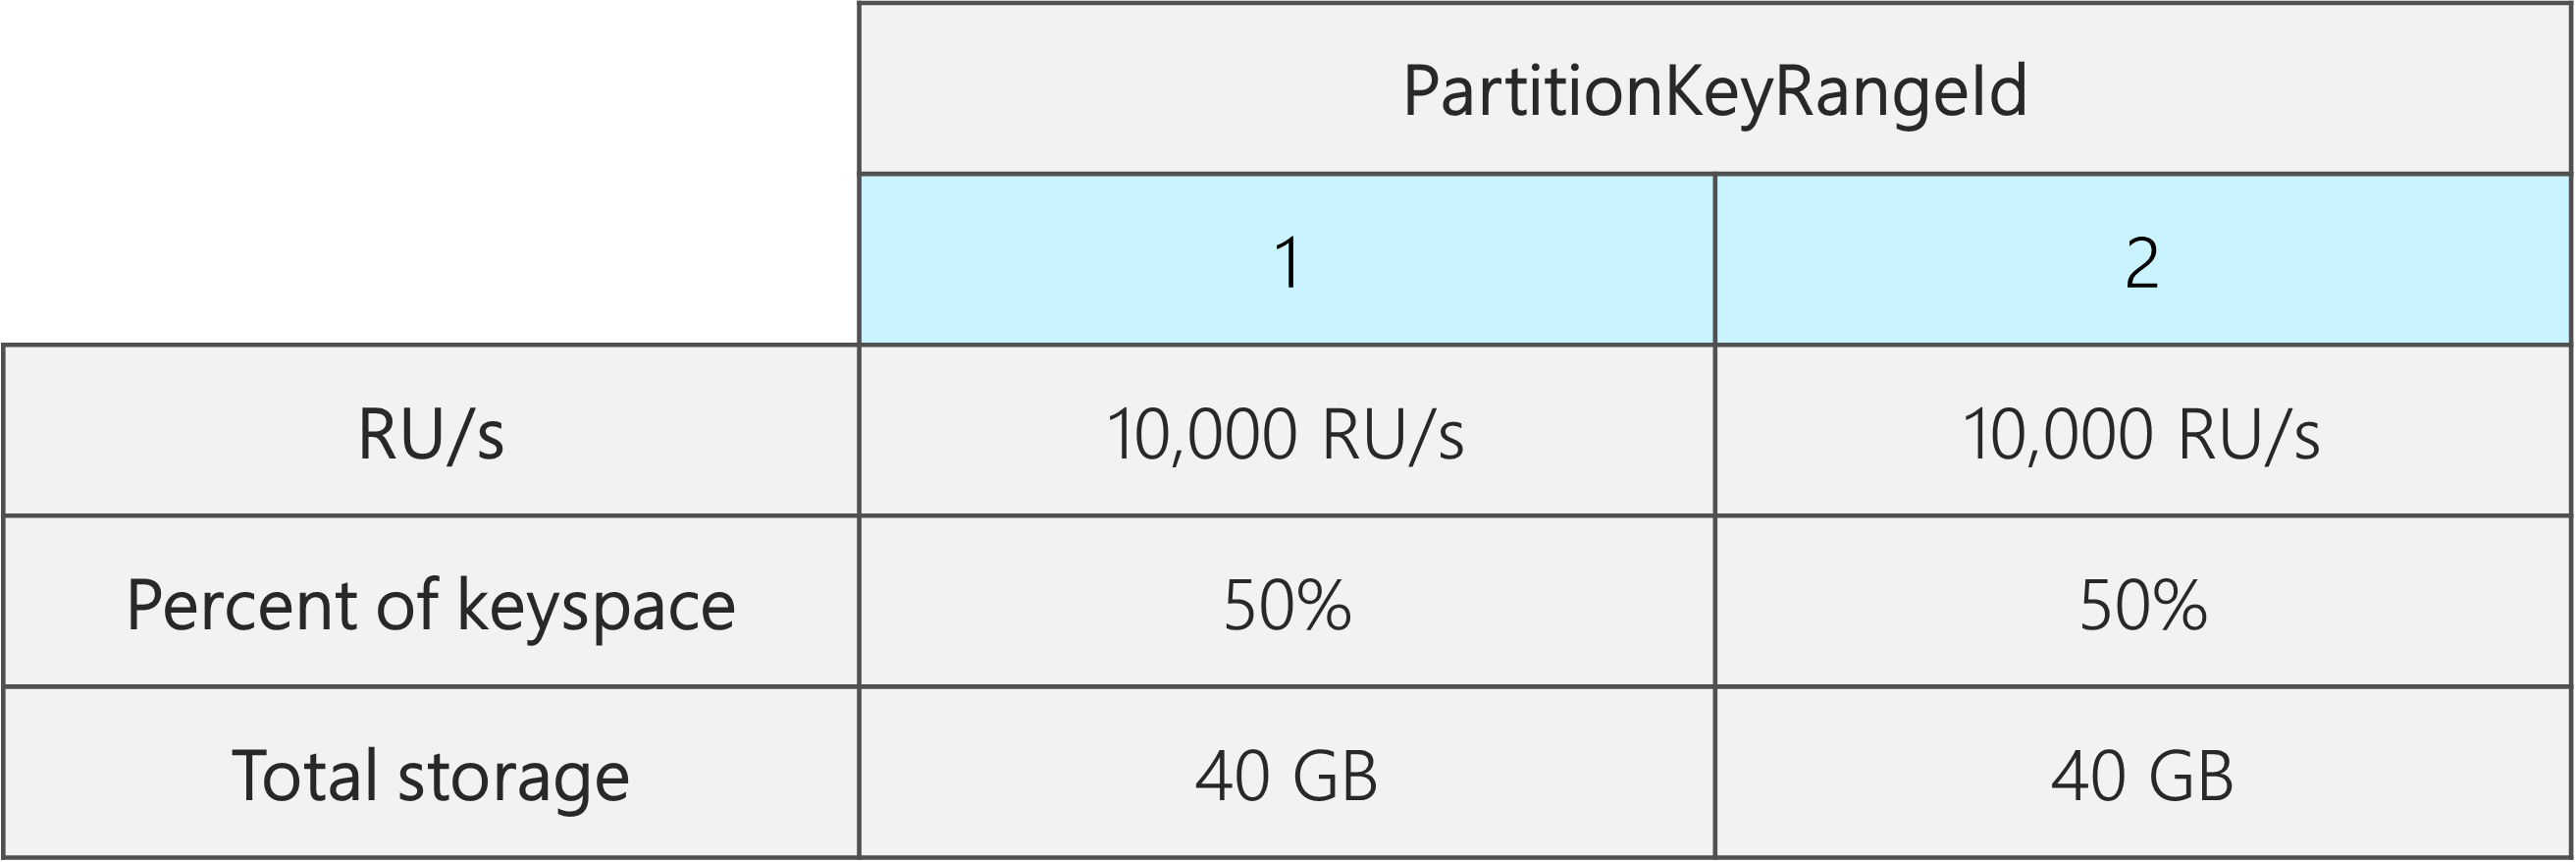 Two PartitionKeyRangeIds, each with 10,000 RU/s, 40 GB, and 50% of the total keyspace